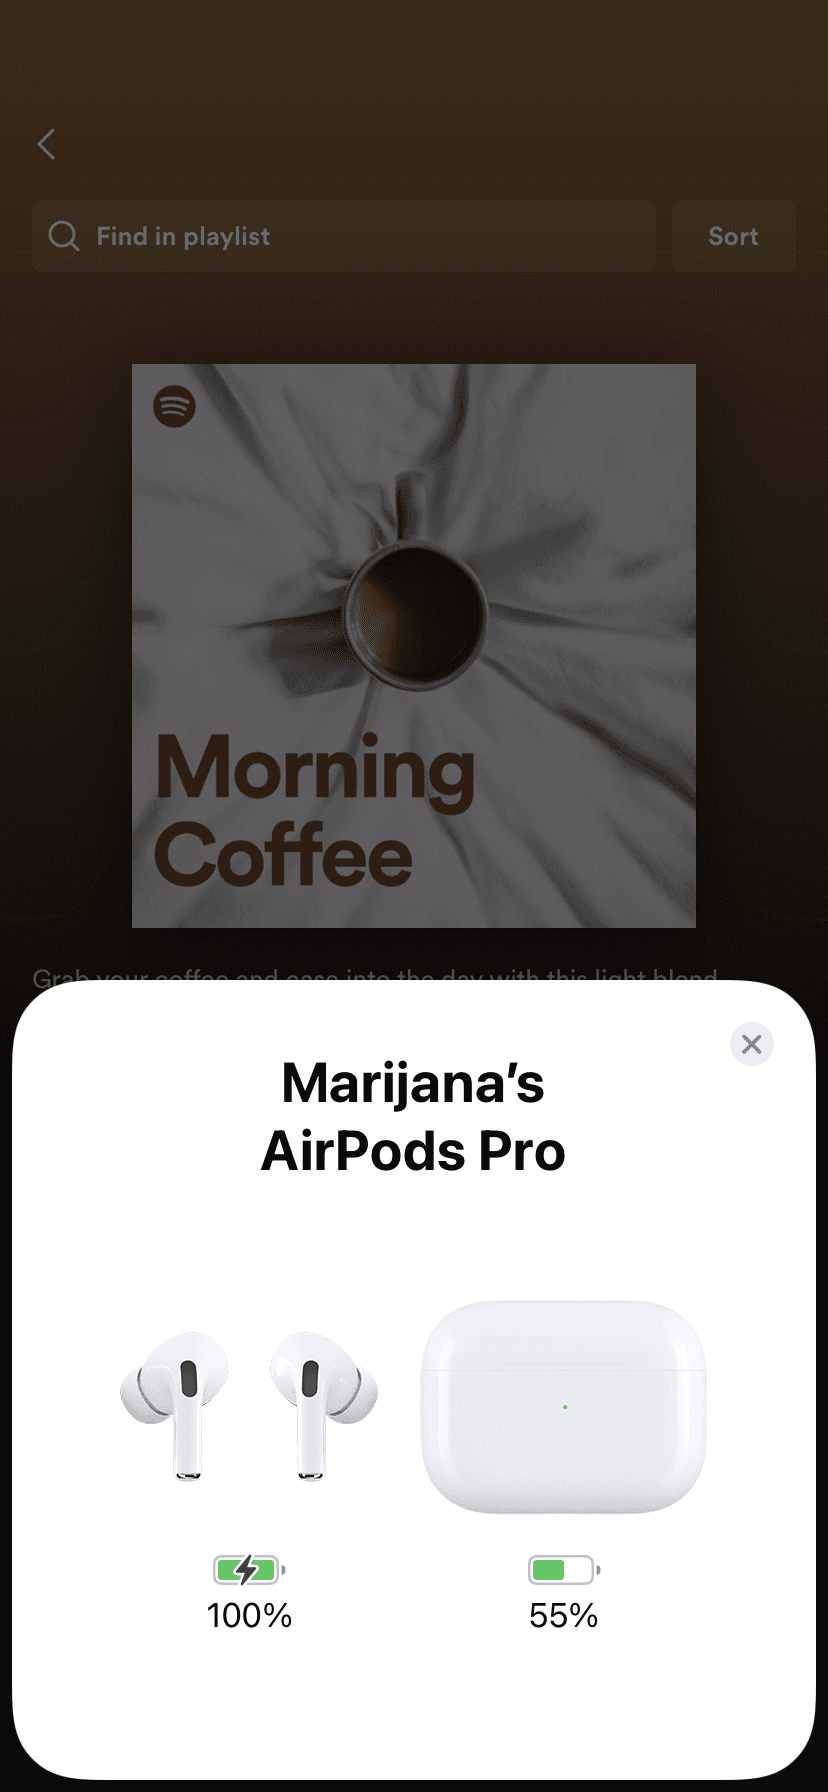 #AirPods Pro prompt that shows current battery levels